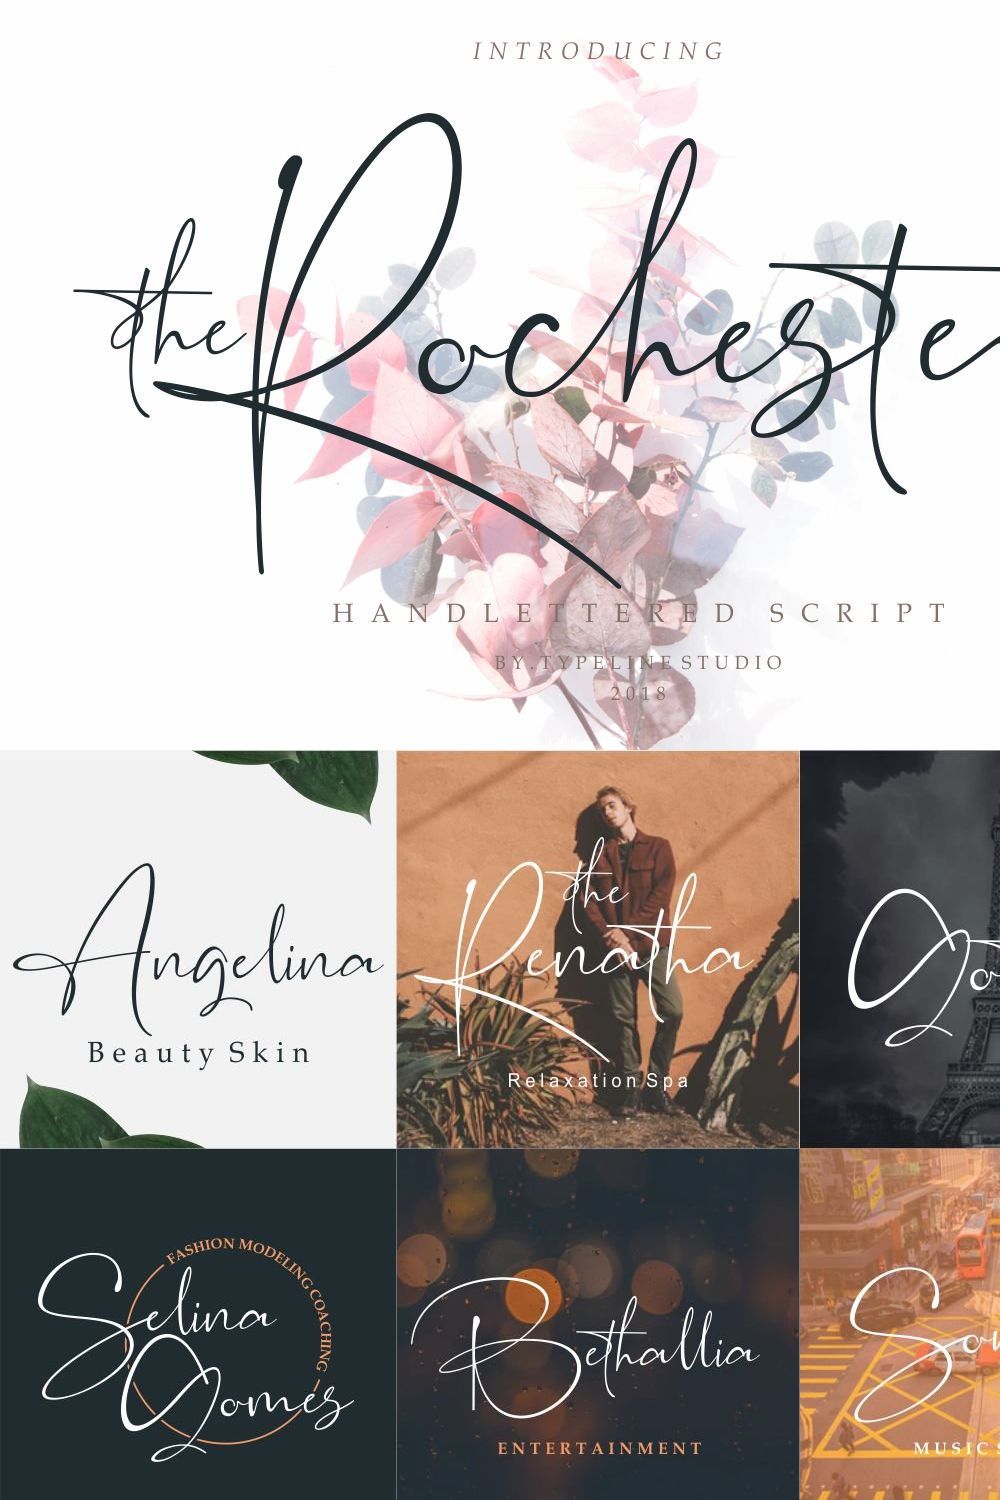 the Rochester // Beatiful Signature pinterest preview image.